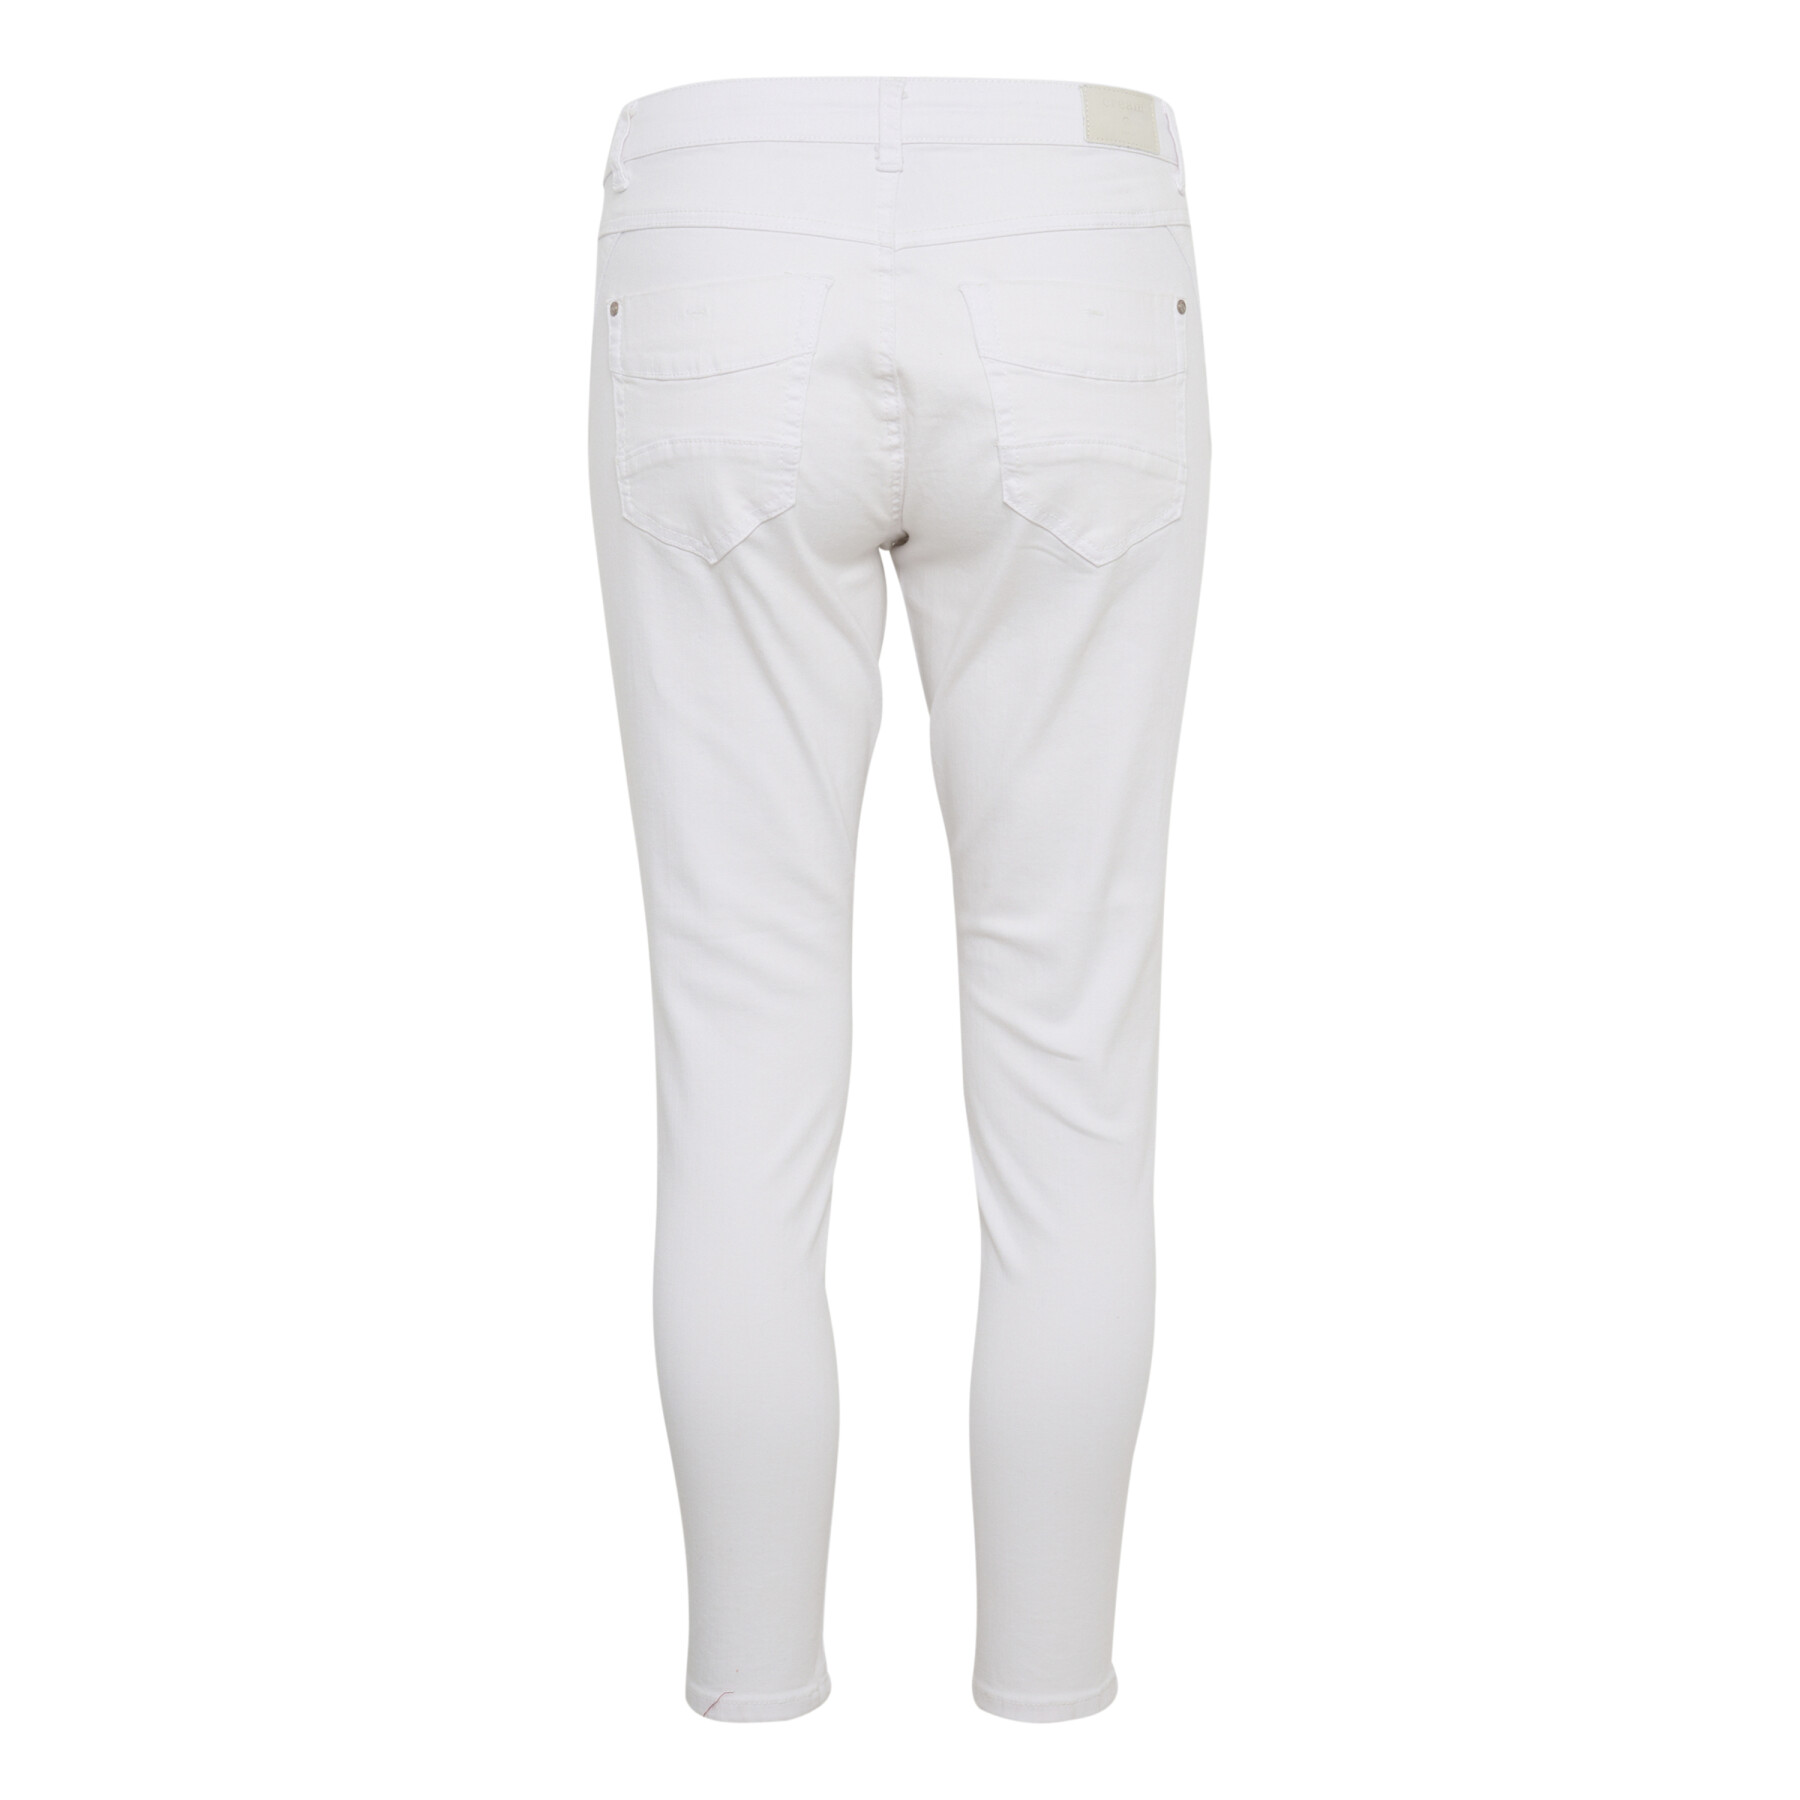 Jeans 7/8 femme Cream Holly Baiily Fit